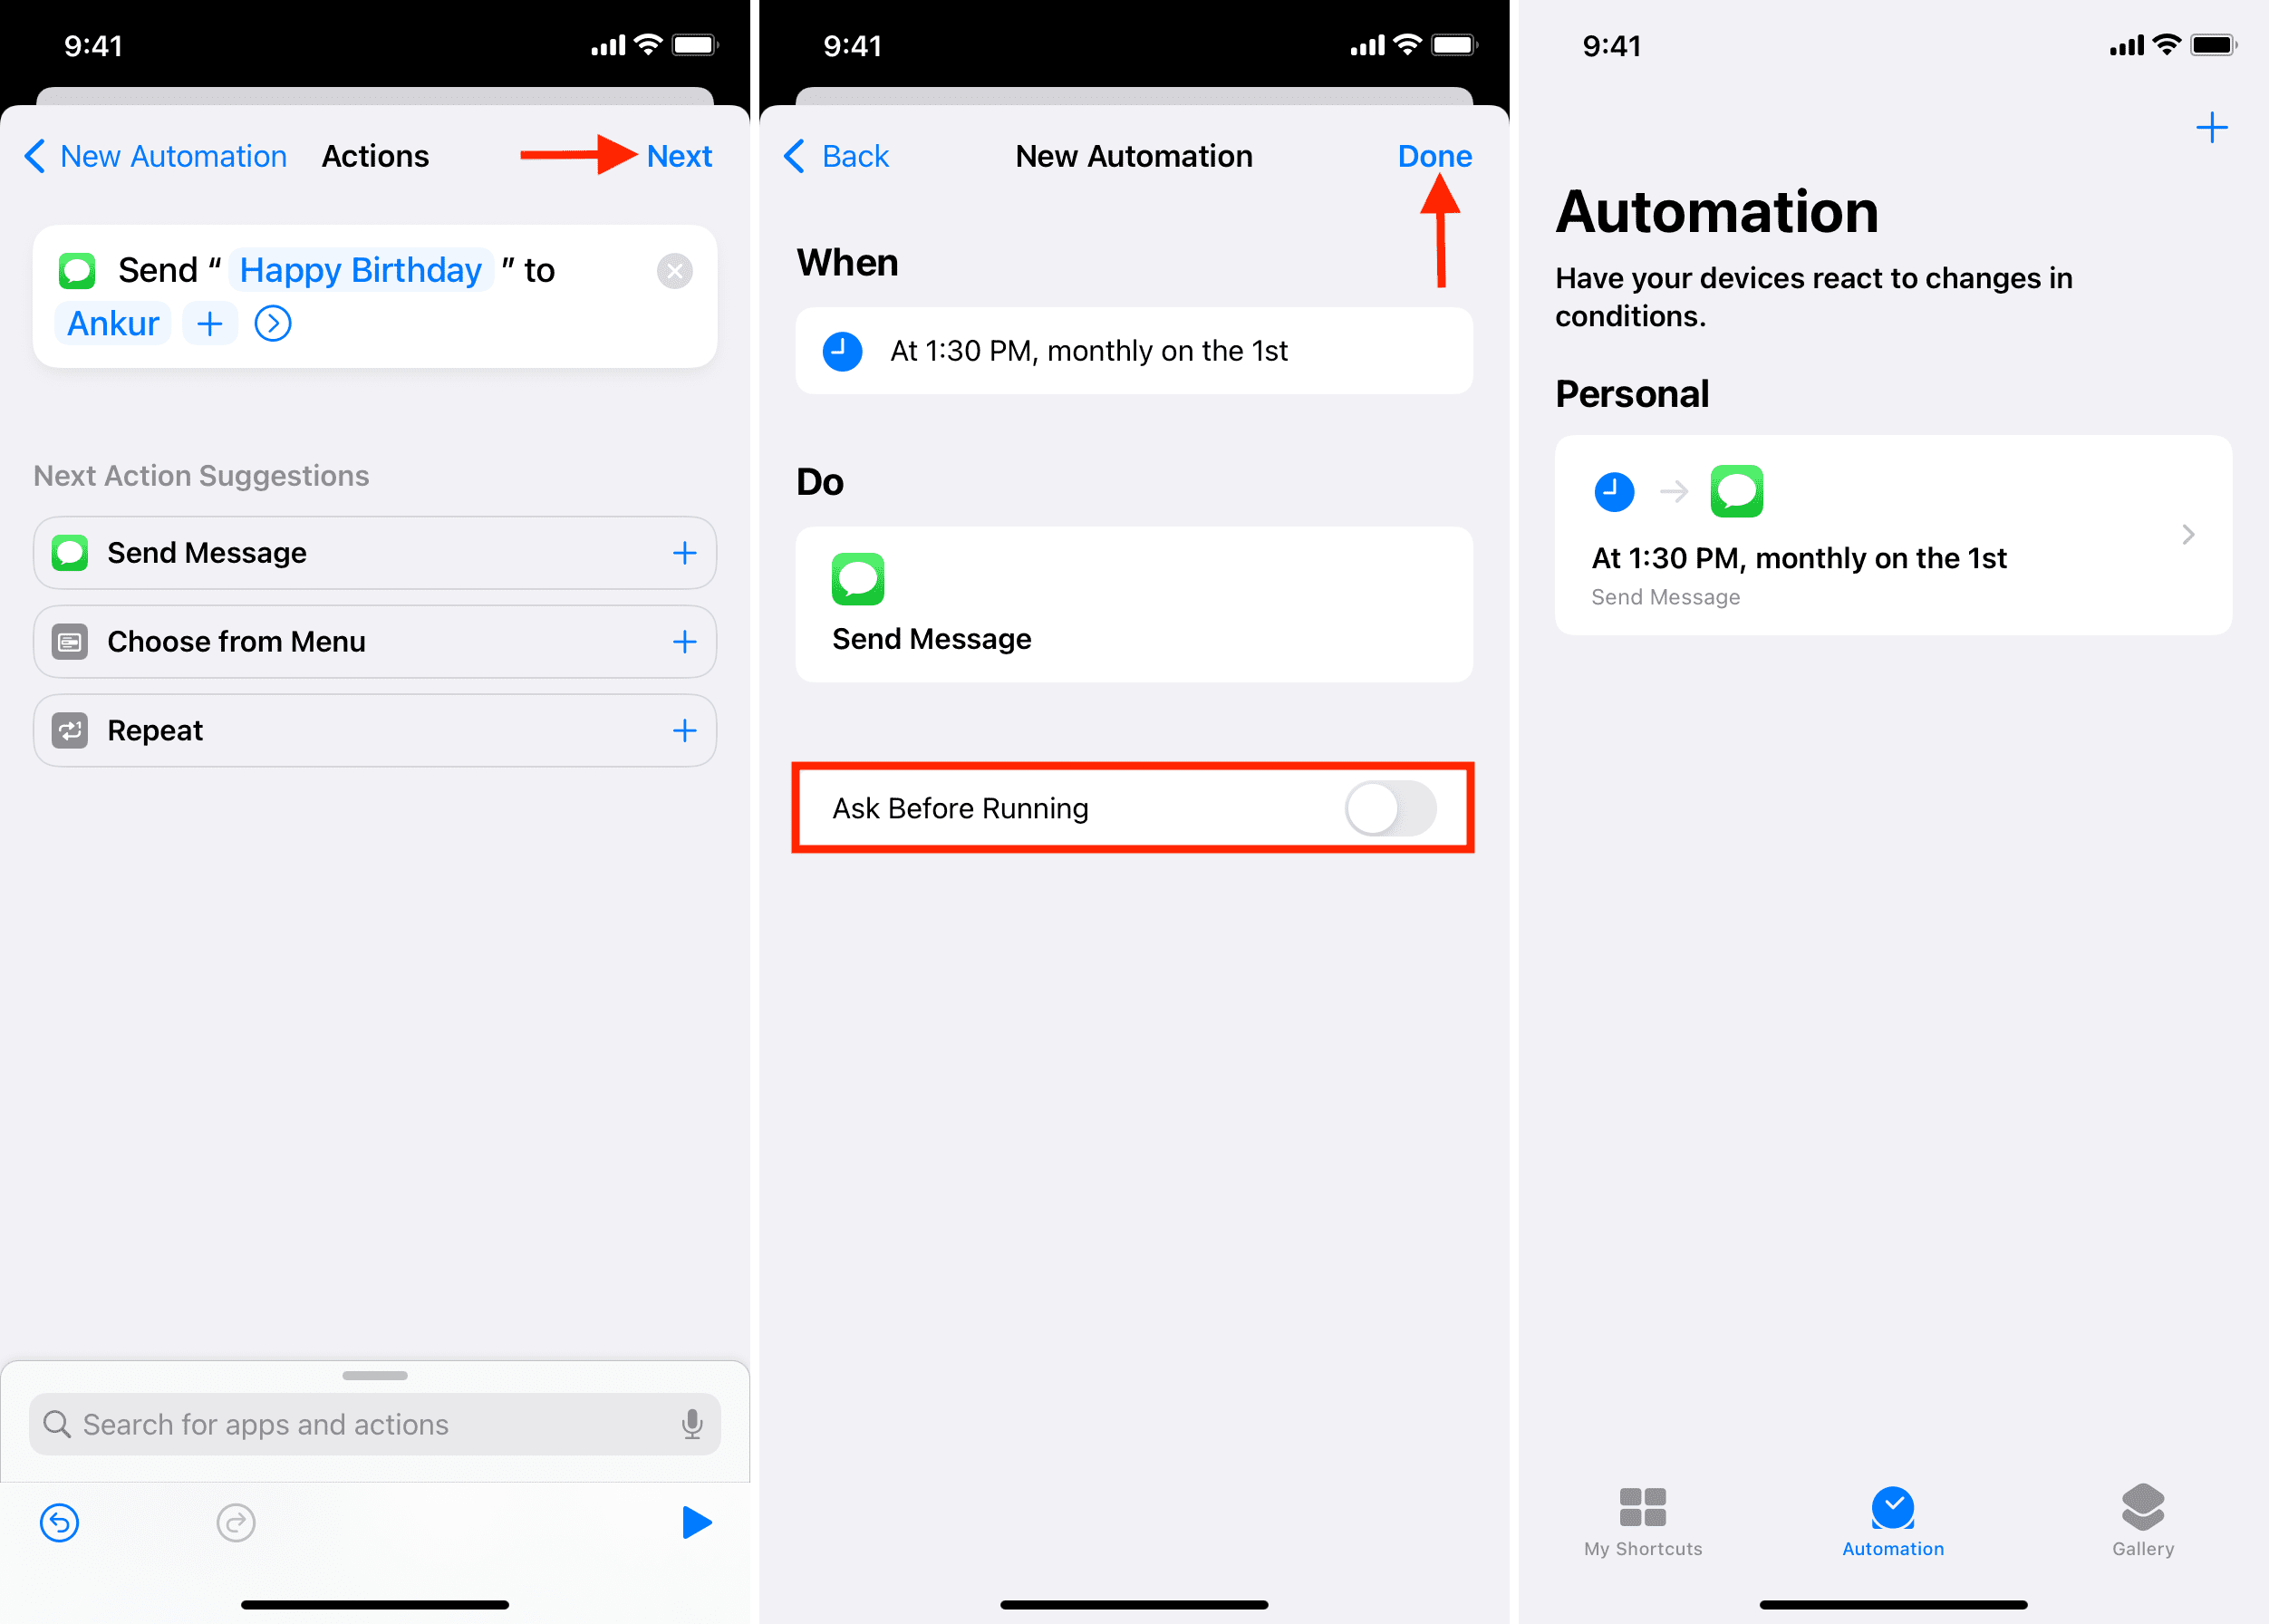 Scheduled Message automation successfully created on iPhone